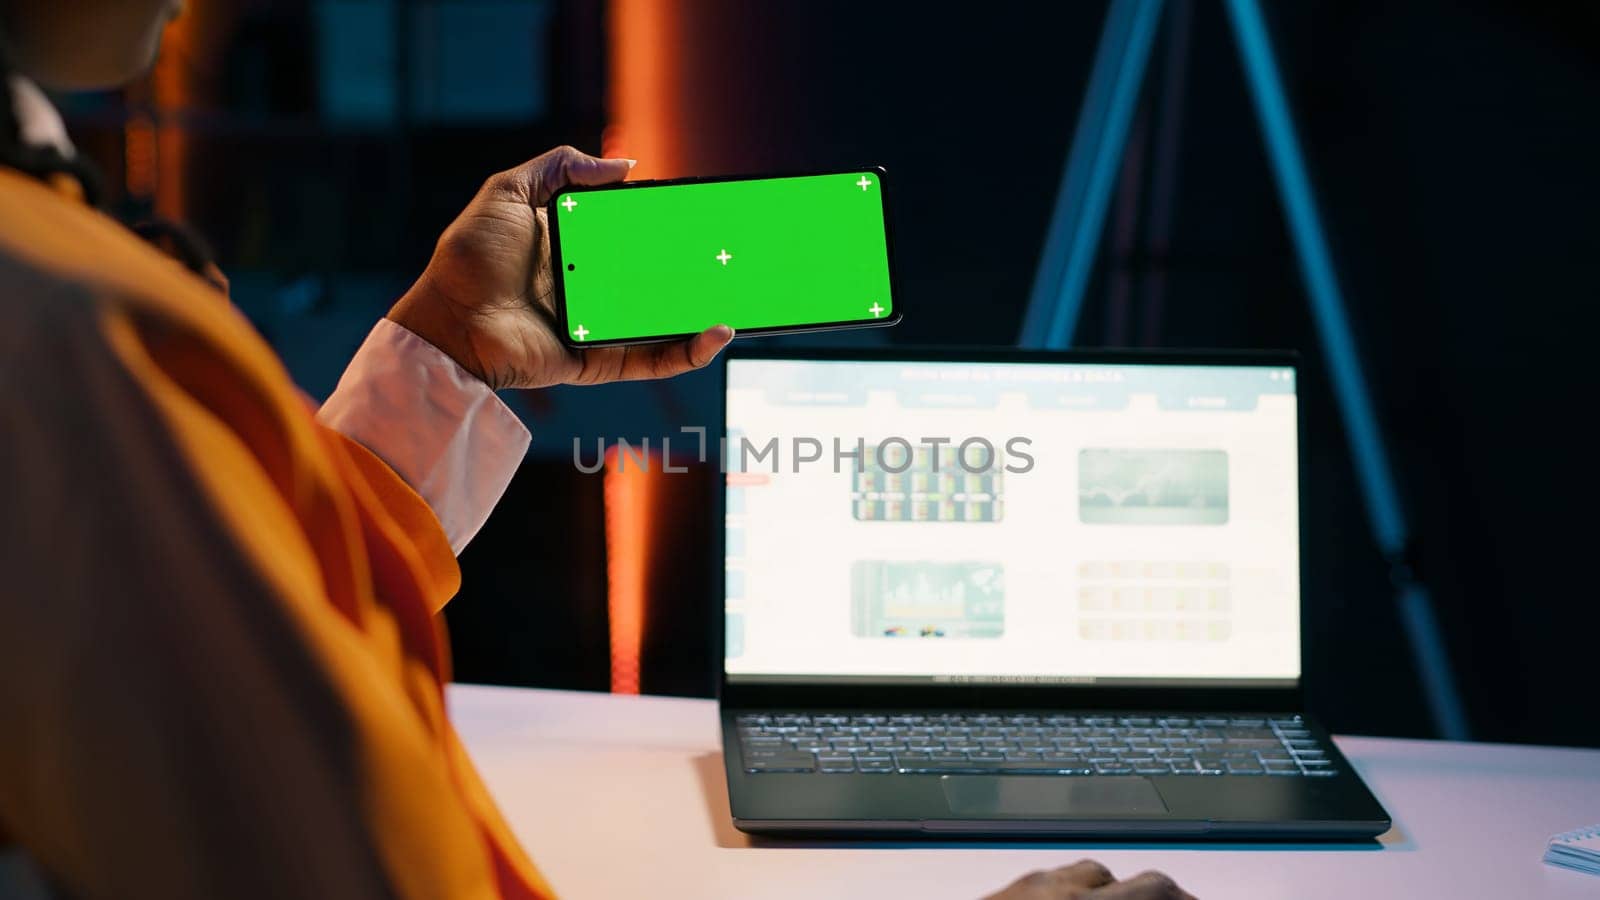 Business student looks at greenscreen on phone app and learning to use tax service software, money management. Young woman holding device with isolated mockup display, e learning. Camera A.